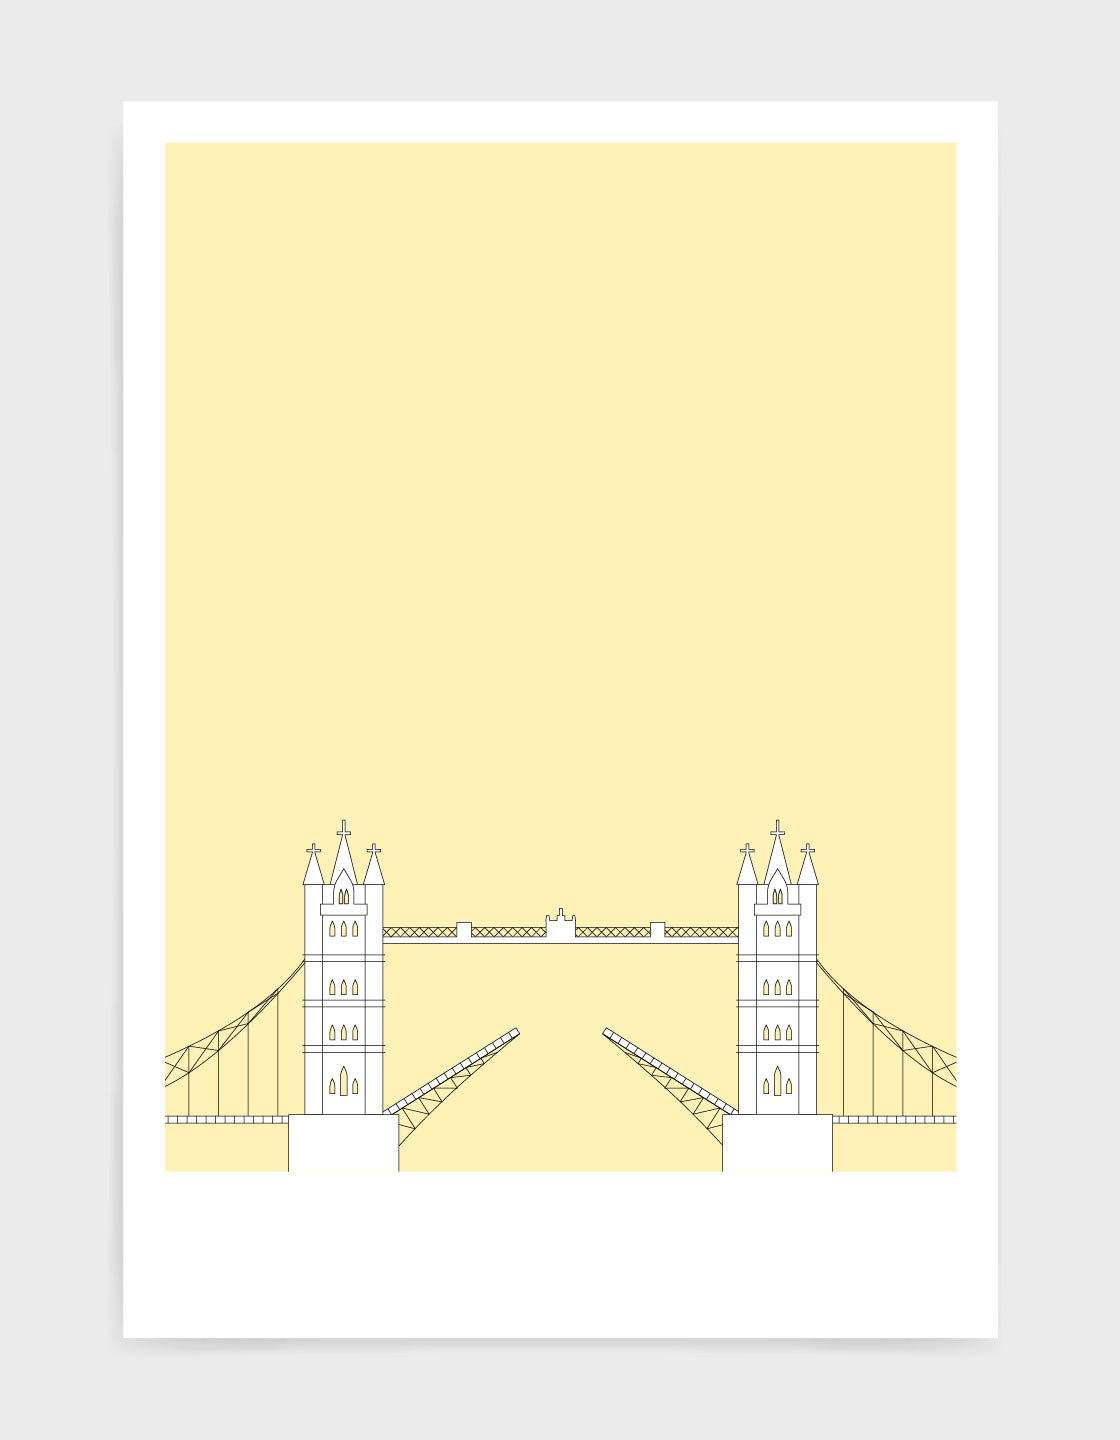 illustration of tower bridge in white against a light yellow background